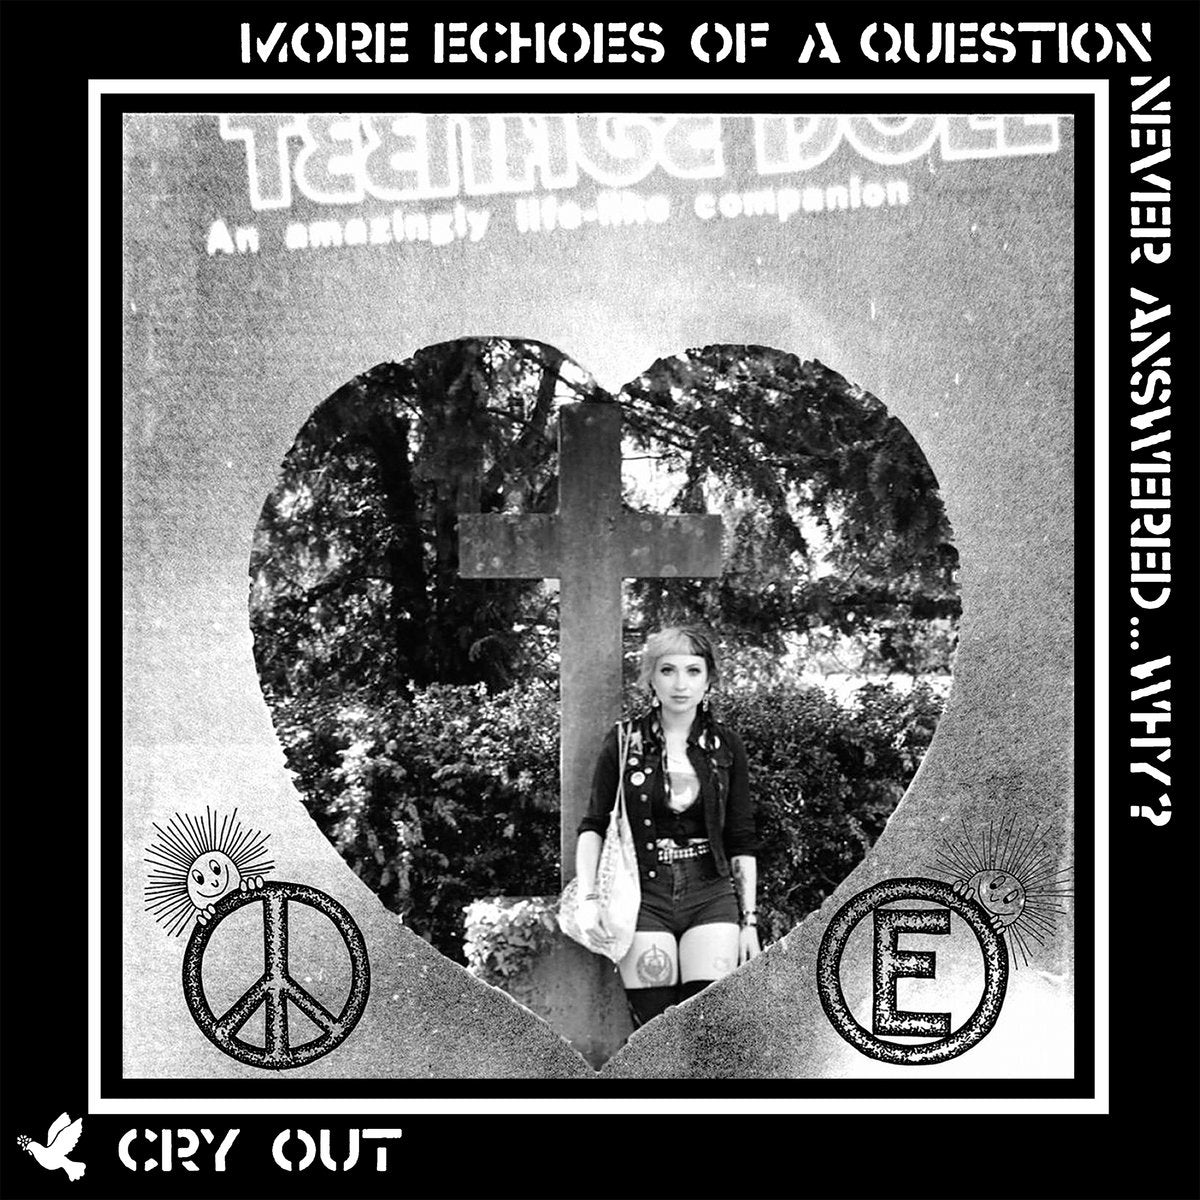 Cry Out - More Echoes Of A Question Never Answered... Why? 12" - Vinyl - La Vida Es Un Mus